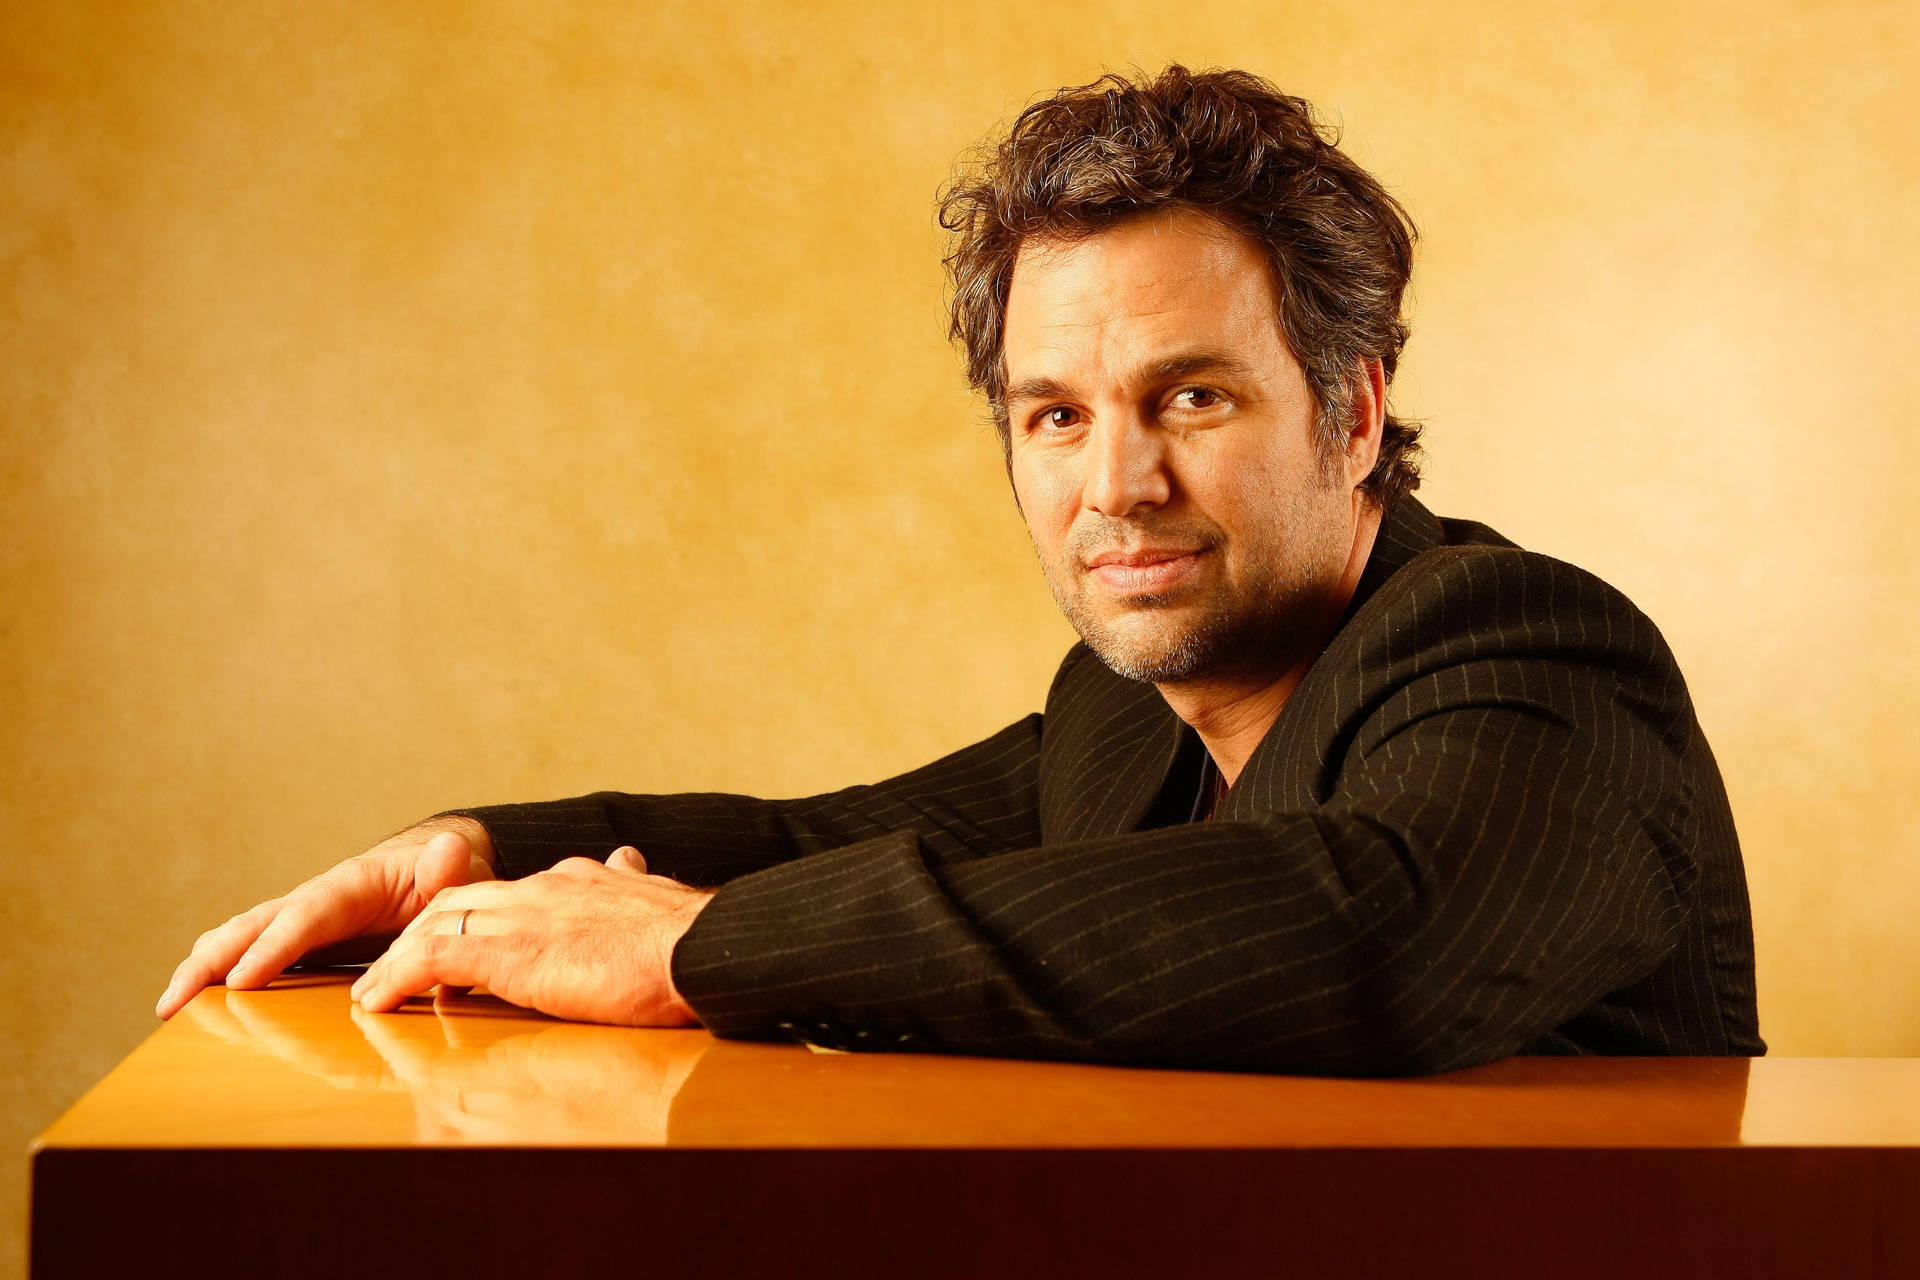 Hollywood Actor Mark Ruffalo In A Pensive Moment